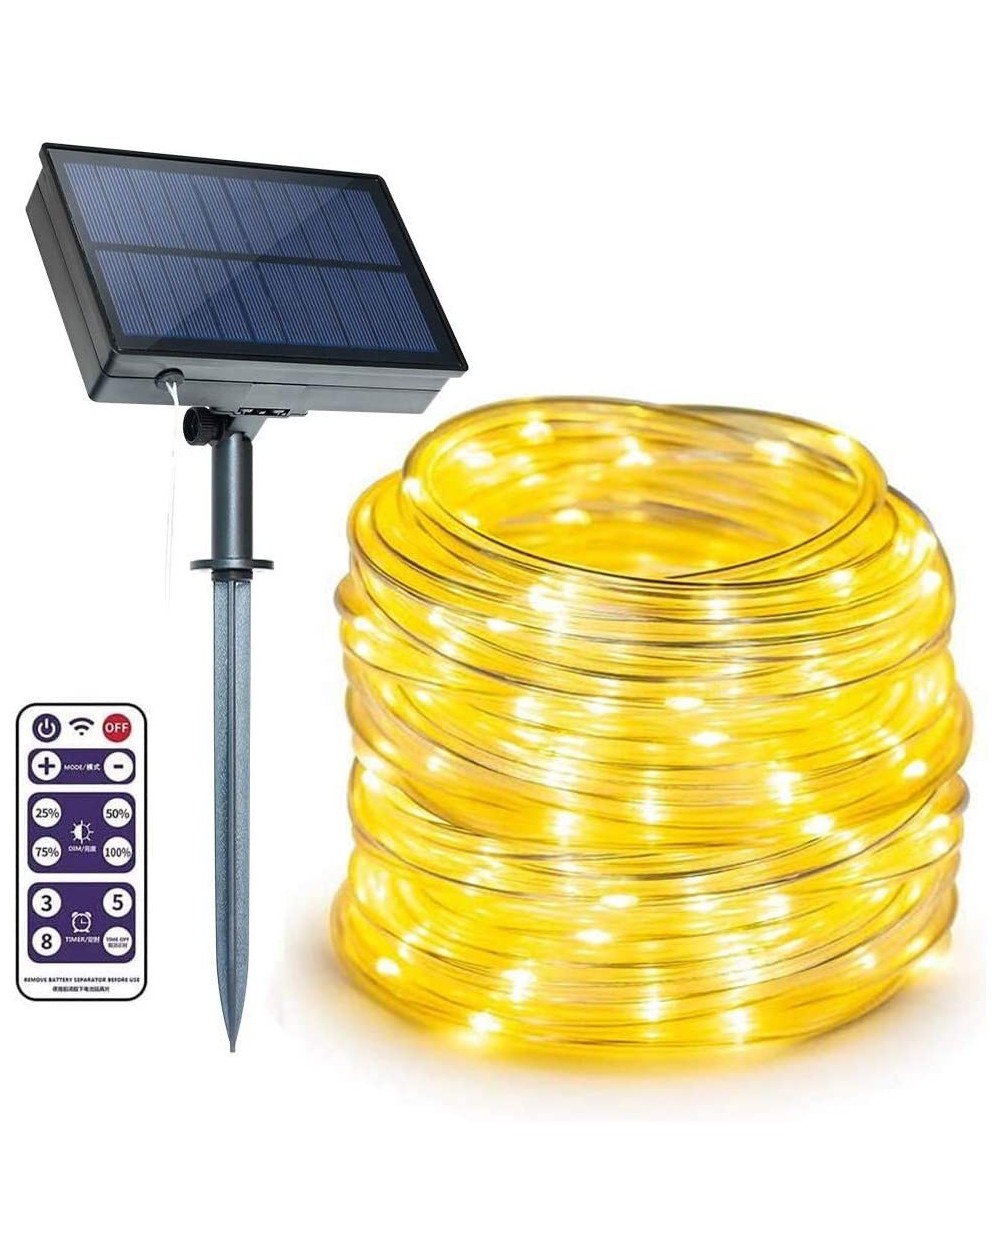 Rope Lights Solar Rope Lights Outdoor- IP67 Waterproof 66ft 200leds Solar Powered String Lights- 8 Modes Dimmable/Timer Remot...